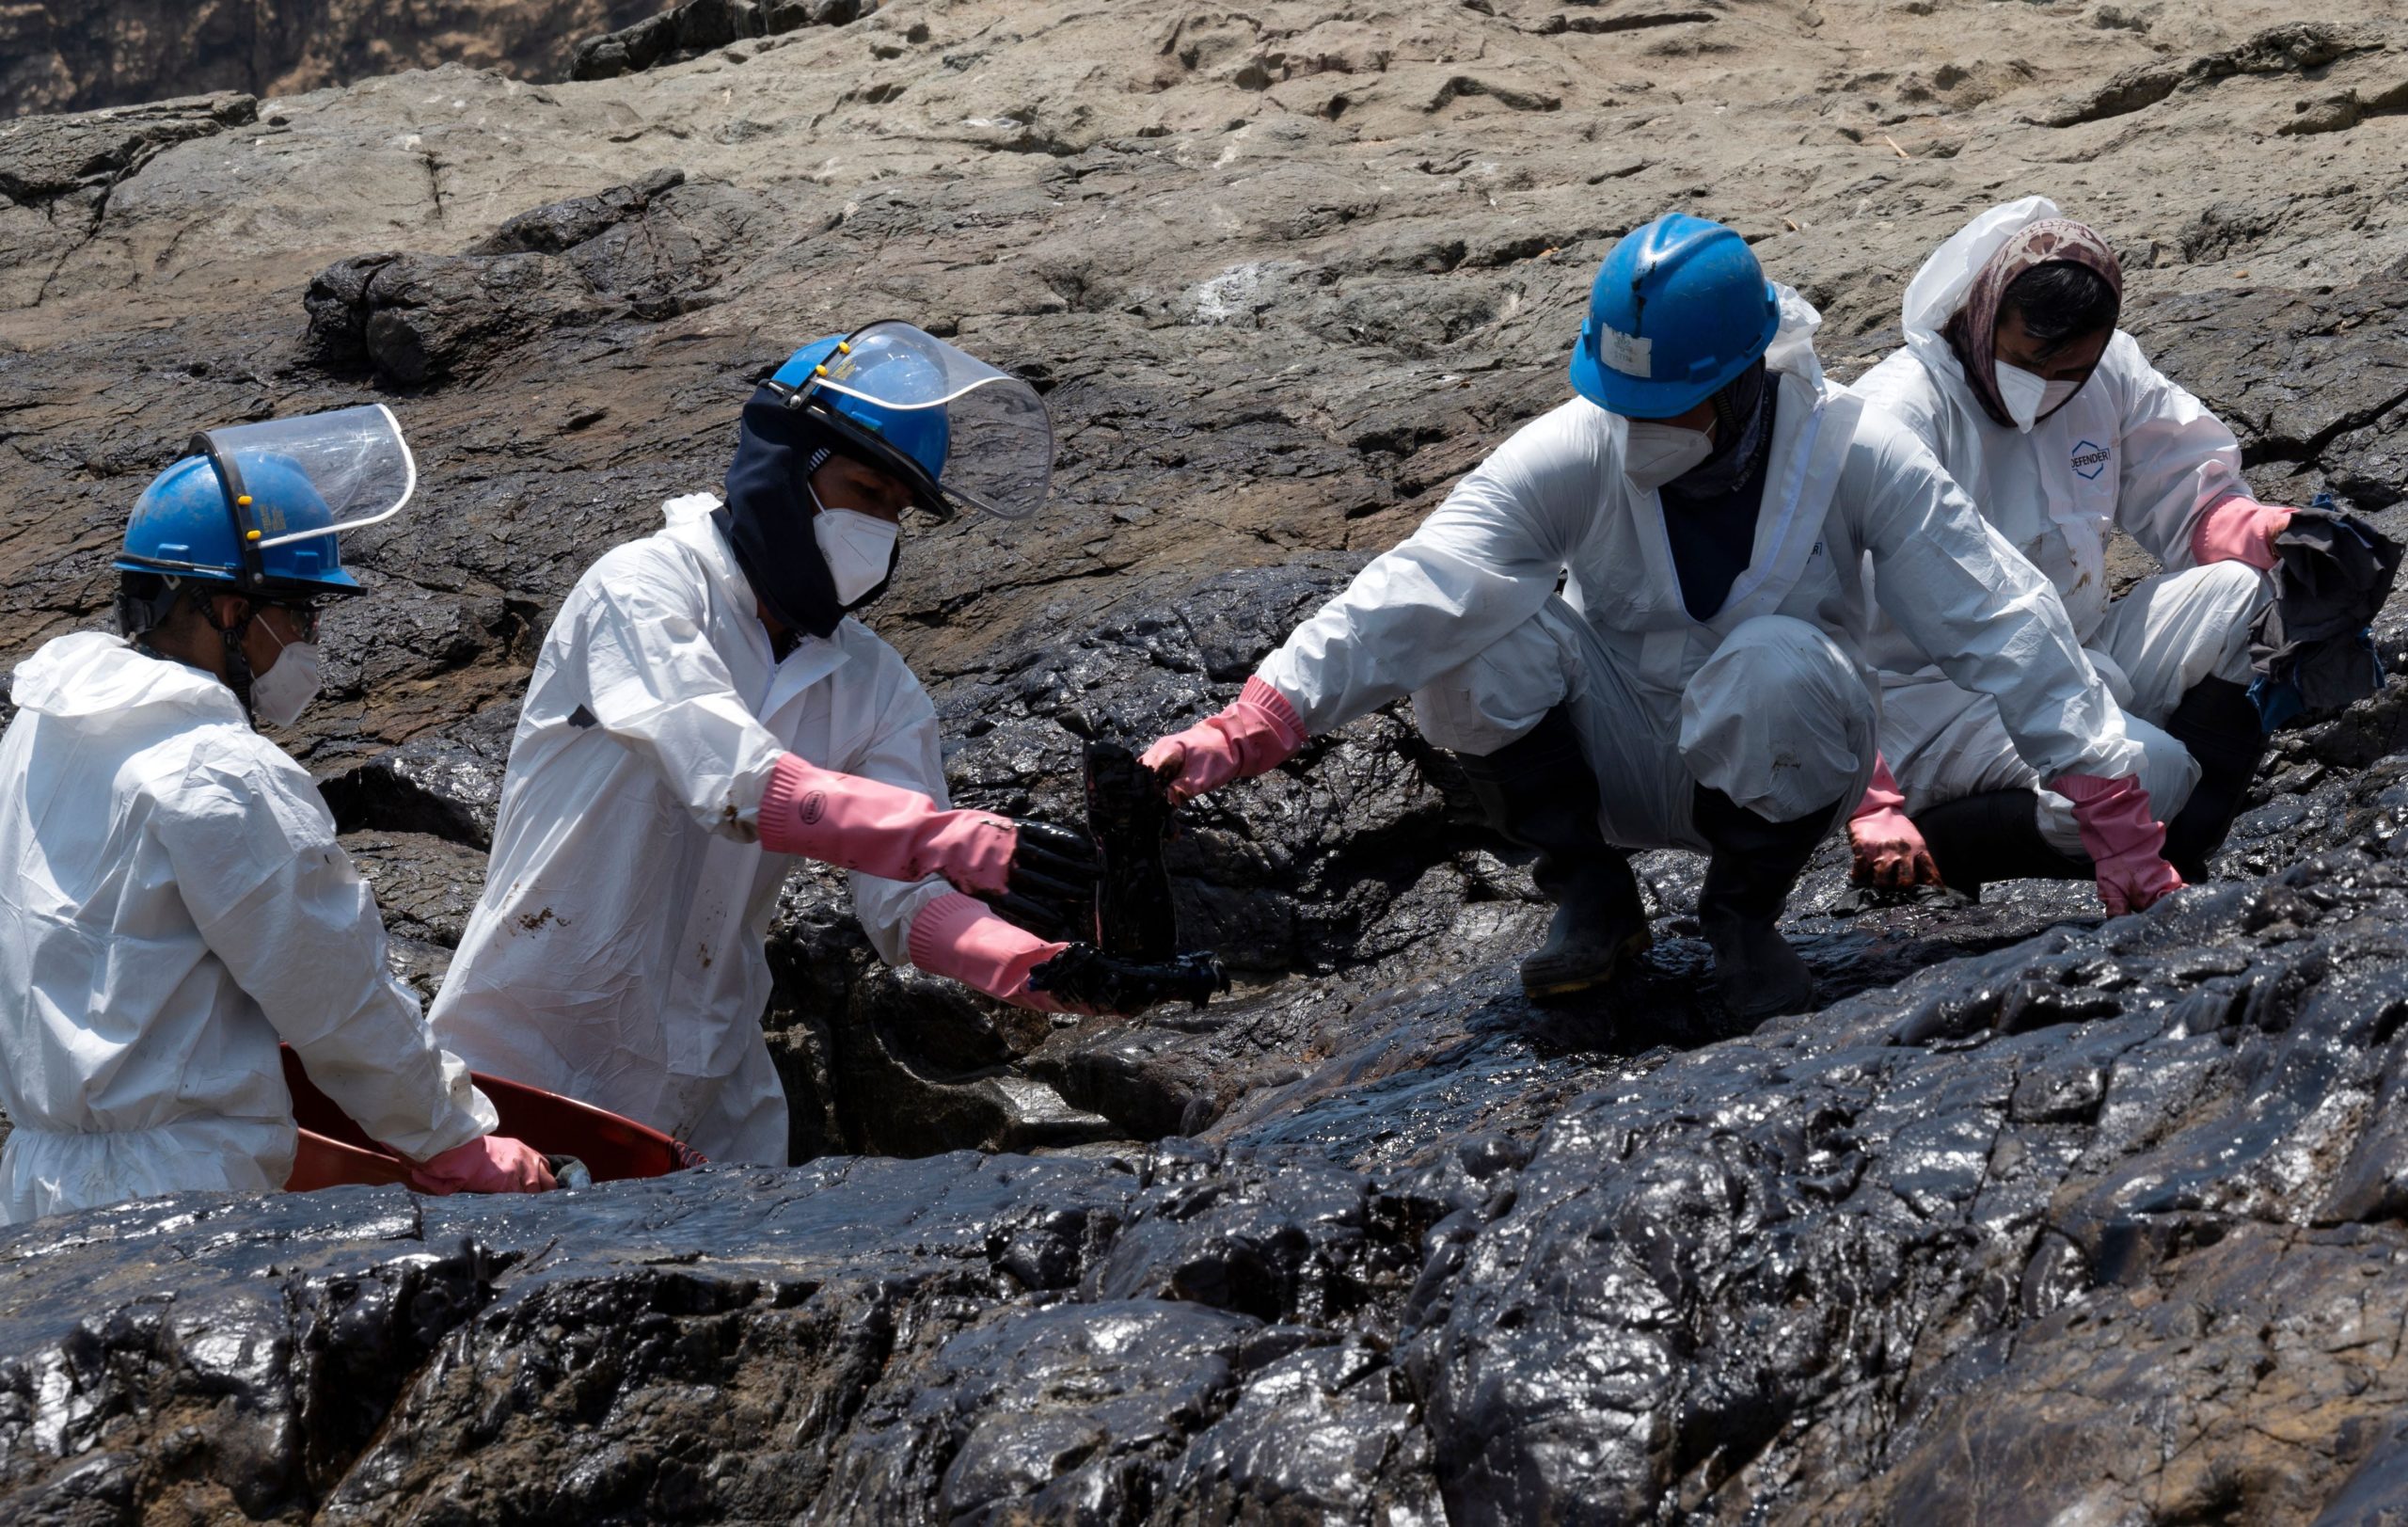 Oil Companies Blame The Tonga Volcanic Eruption For Oil Spill In Perú